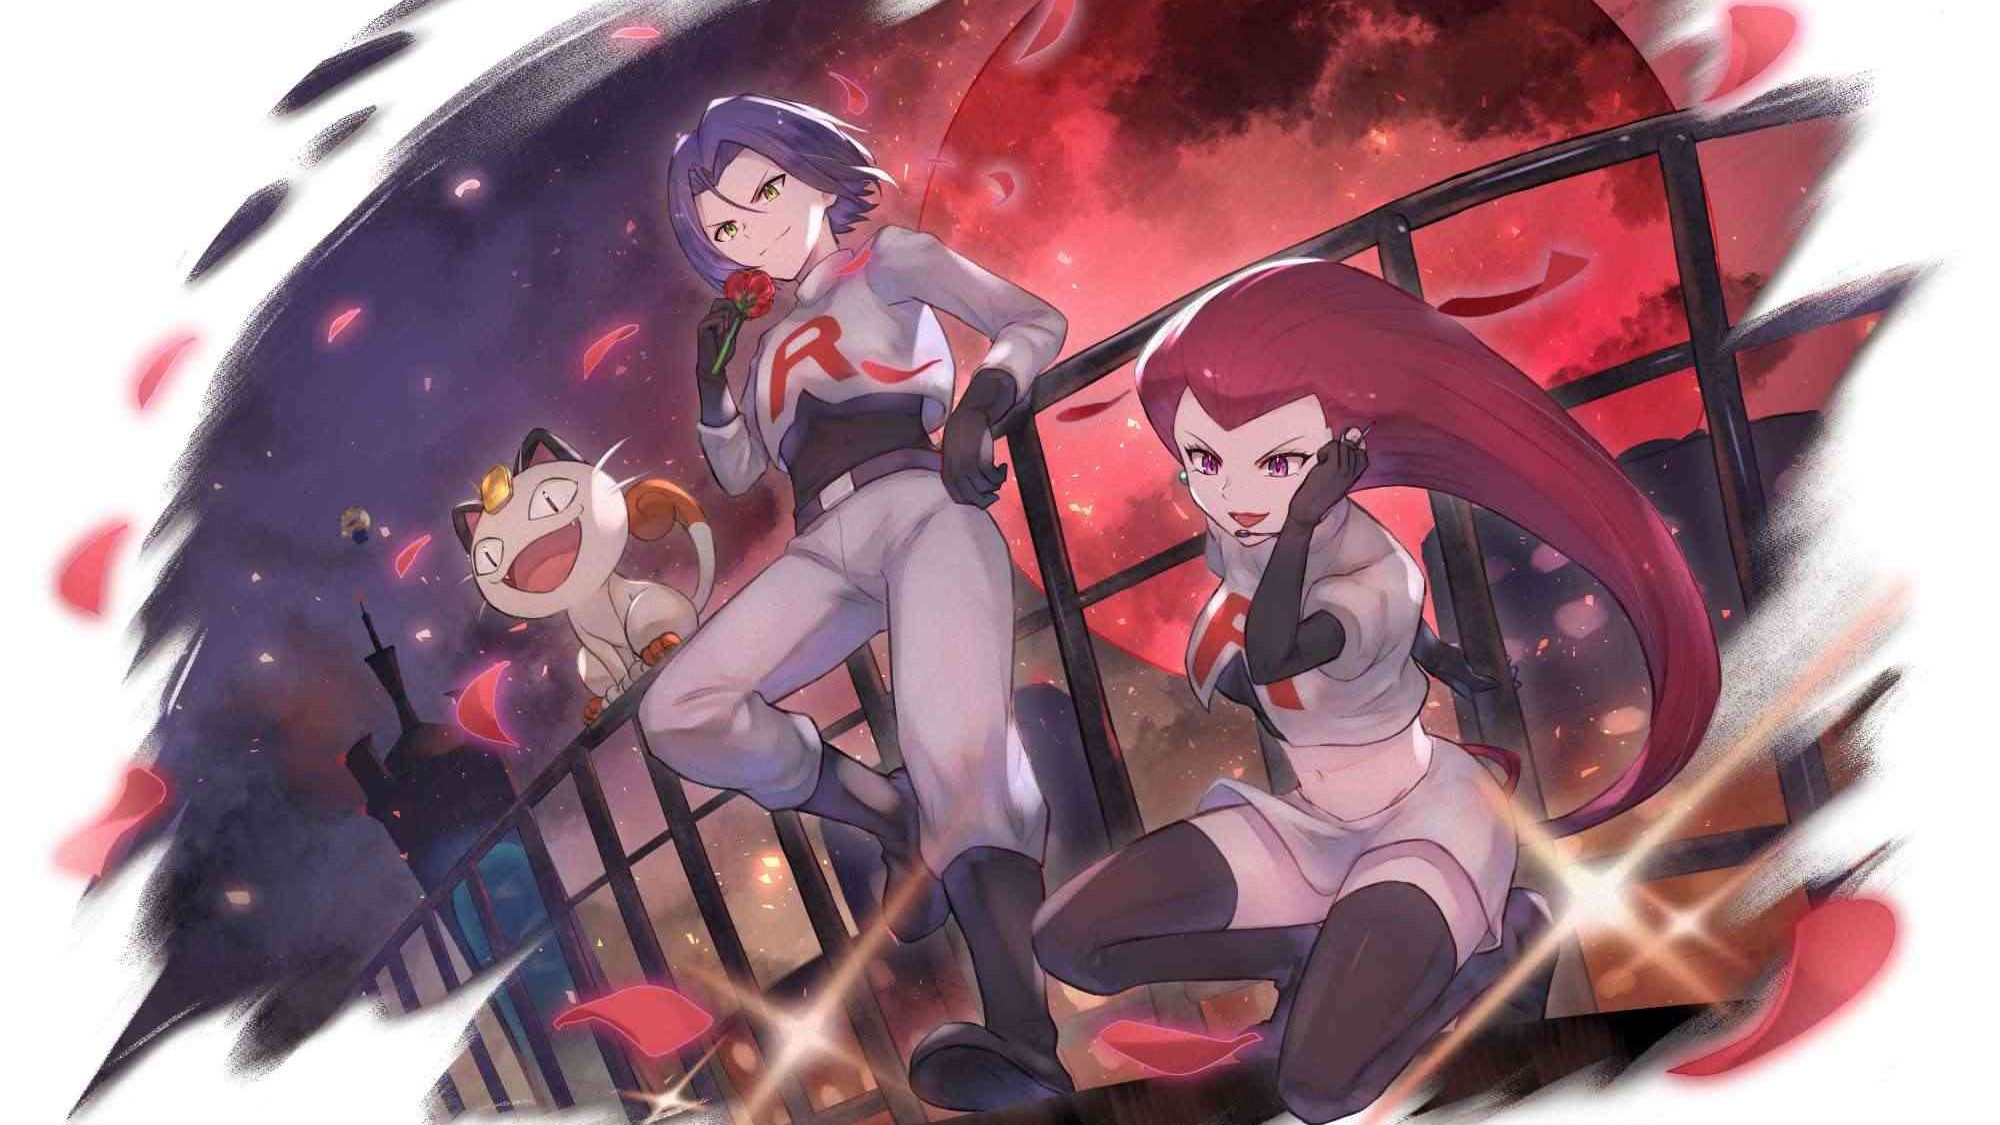 Will Team Rocket bid farewell to the audience in the new part of Pokemon?